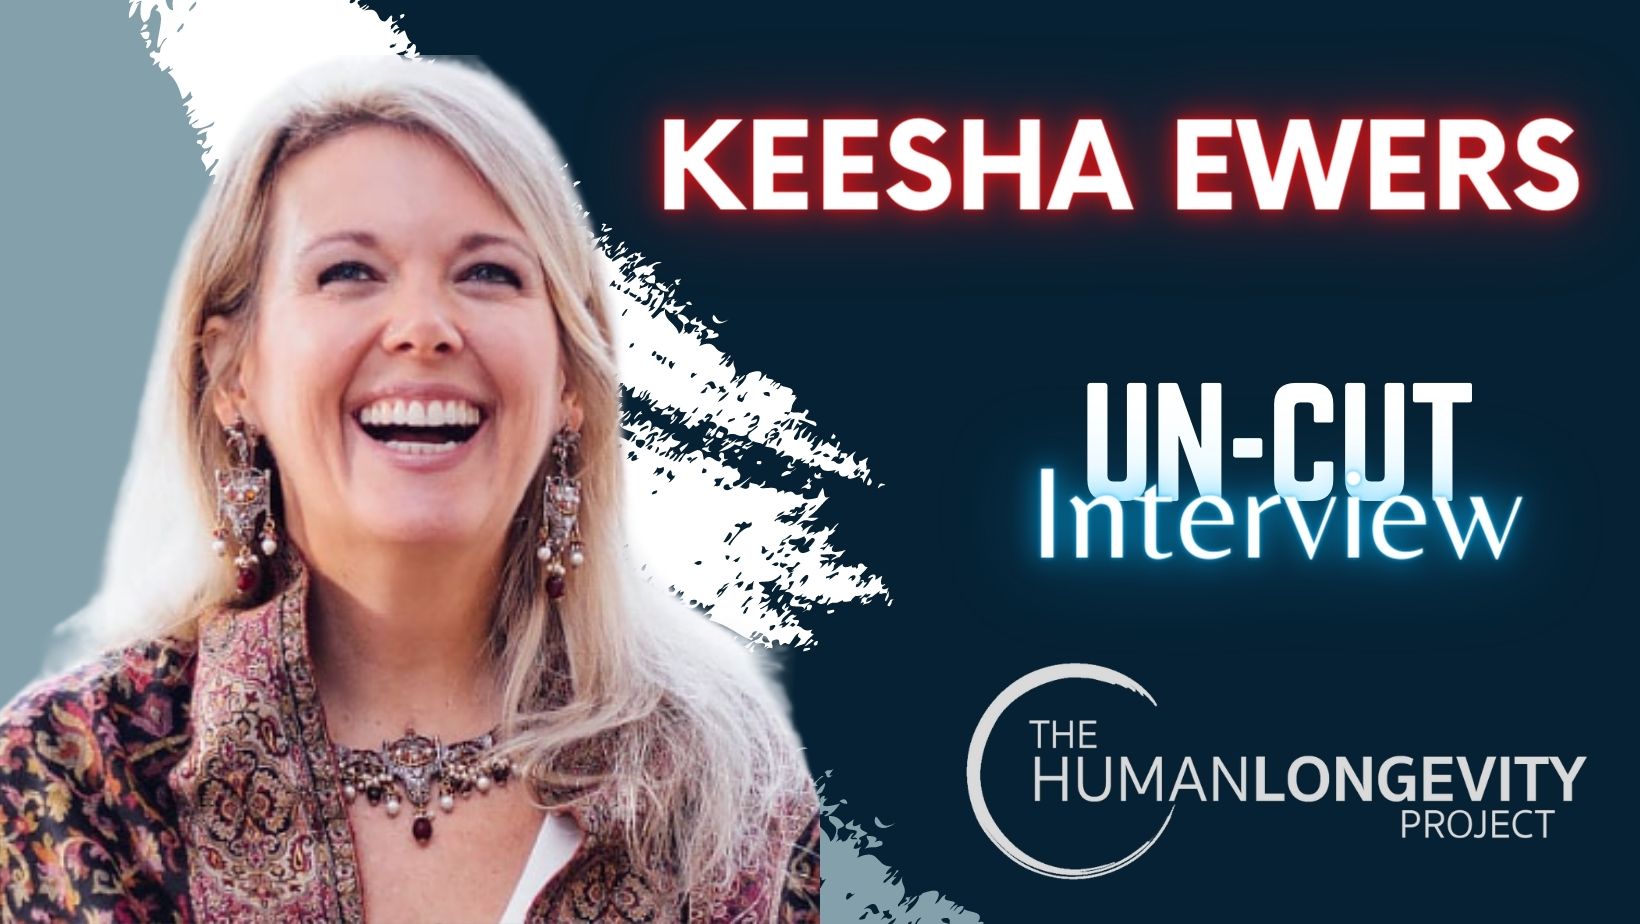 Human Longevity Project Uncut Interview With Dr. Keesha Ewers